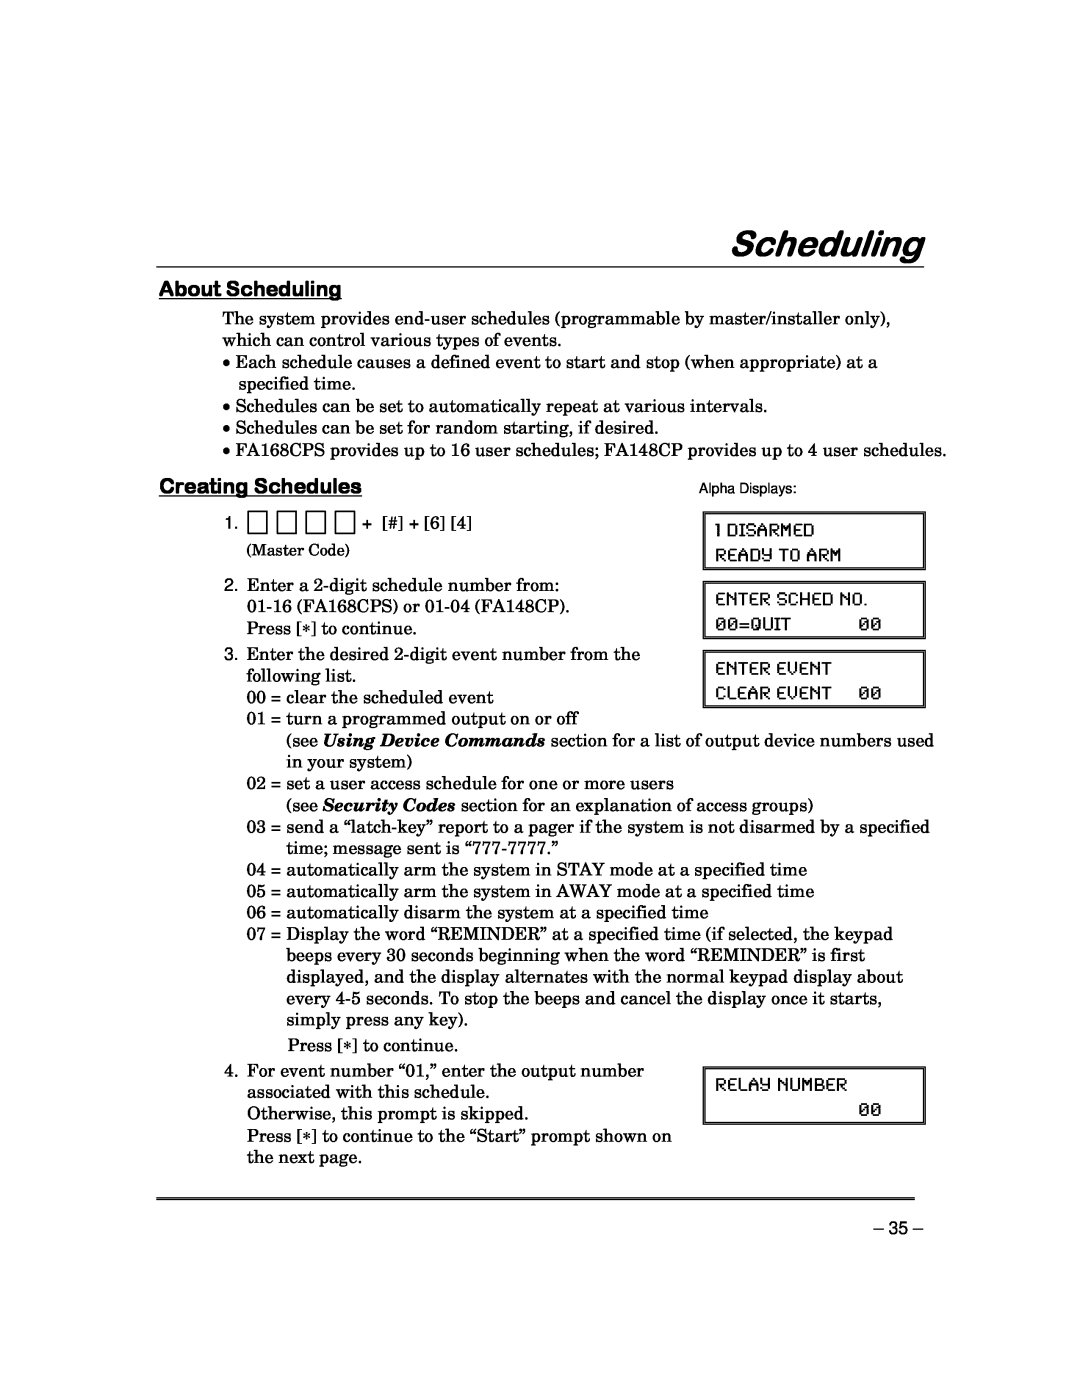 Garmin FA168CPS manual About Scheduling, Creating Schedules, Relay Number 